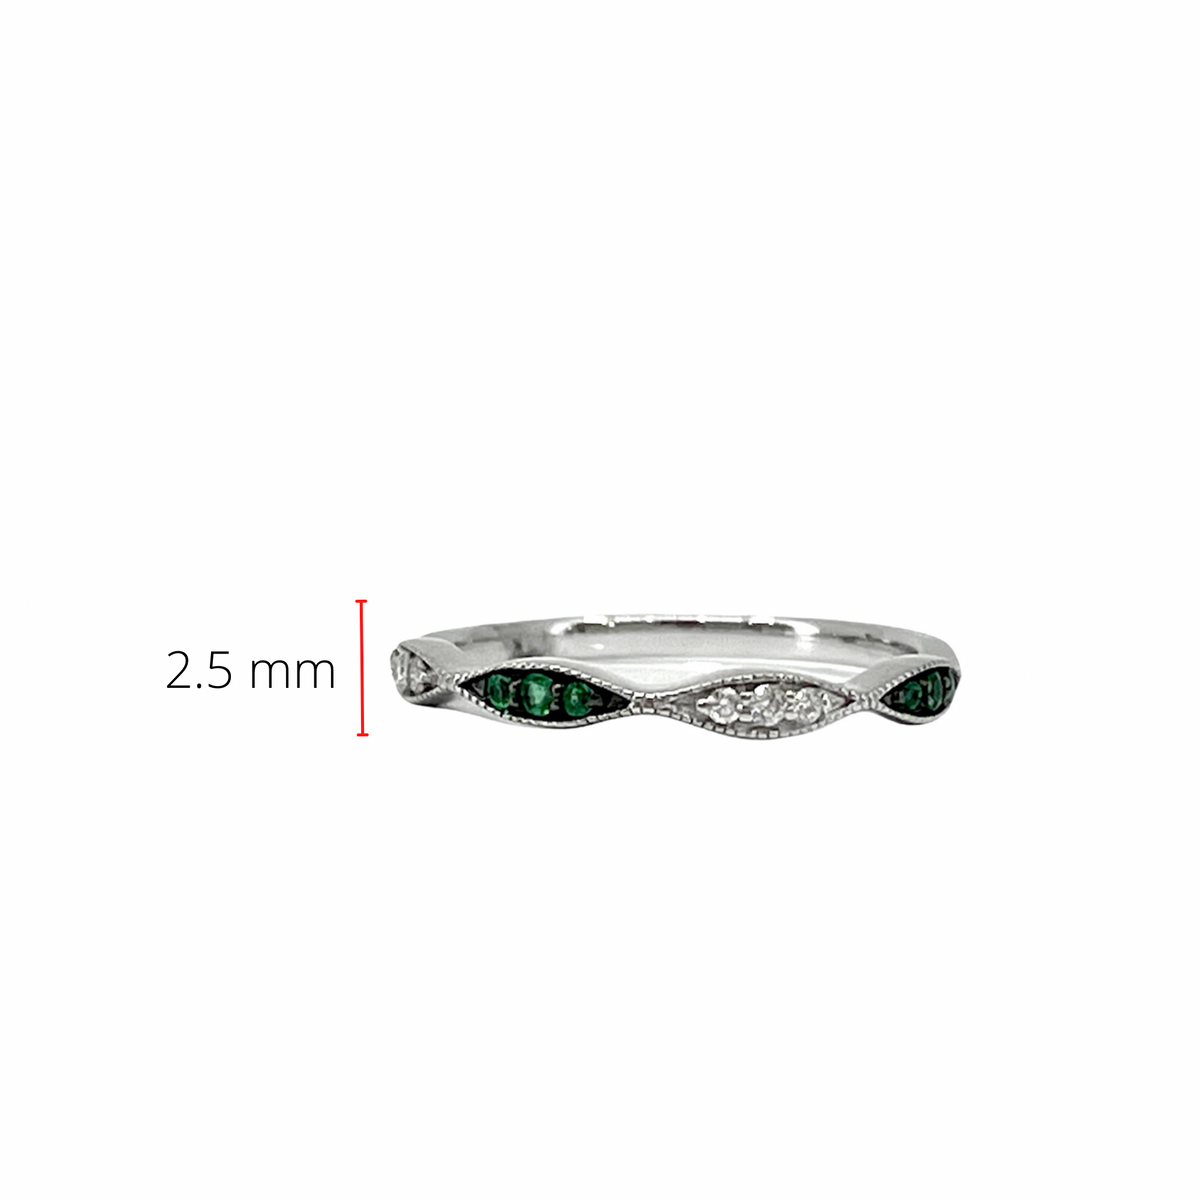 10K White Gold 0.06cttw Genuine Emerald and 0.07cttw Diamond Ring, size 7